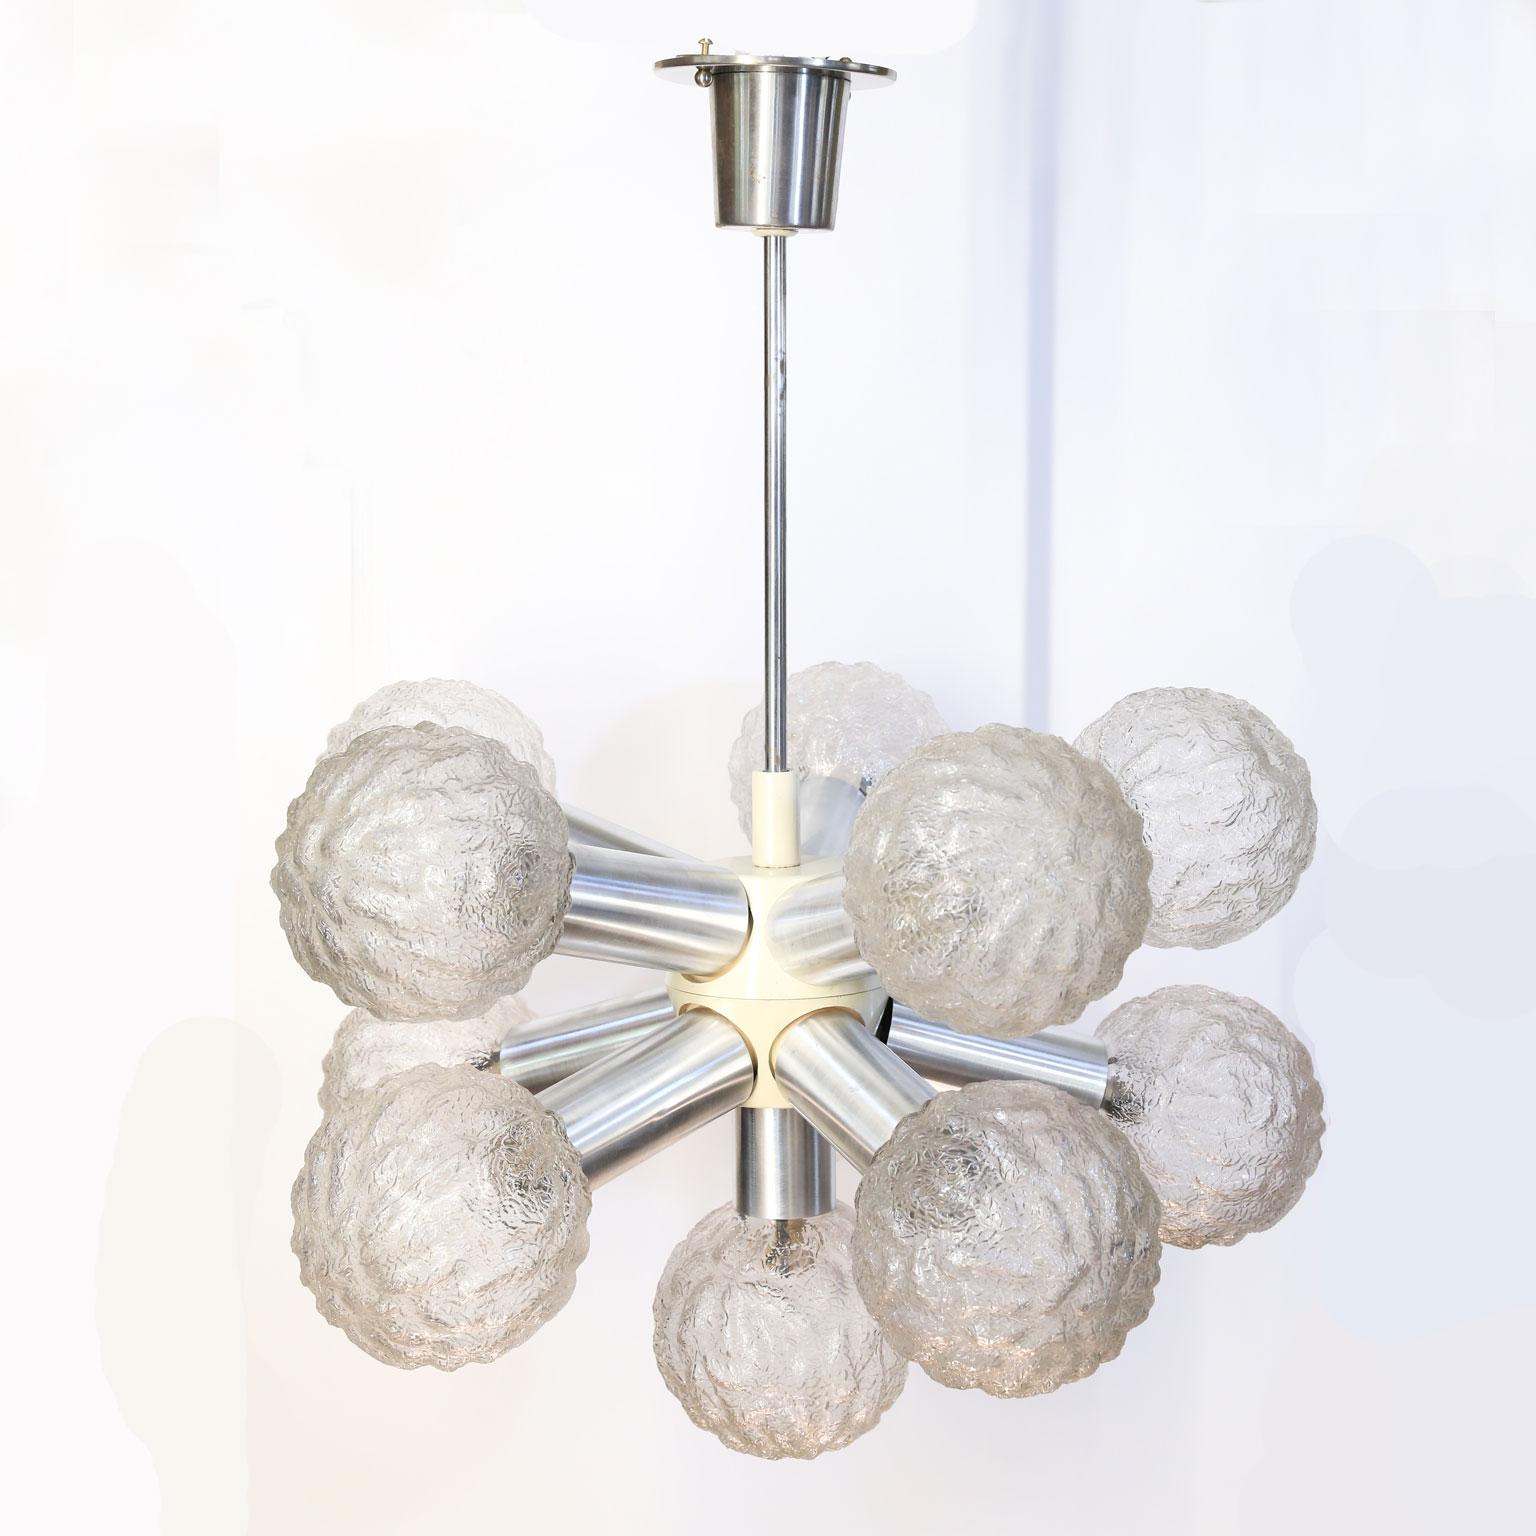 Pair of modern German flush-mount fixtures with eleven lights each. These fun Sputnik-like flush-mounts have Limburg glass shades.  They are comprised of painted metal, chrome, and hand-blown glass. These are Mid-Century Modern lamps that are a bit